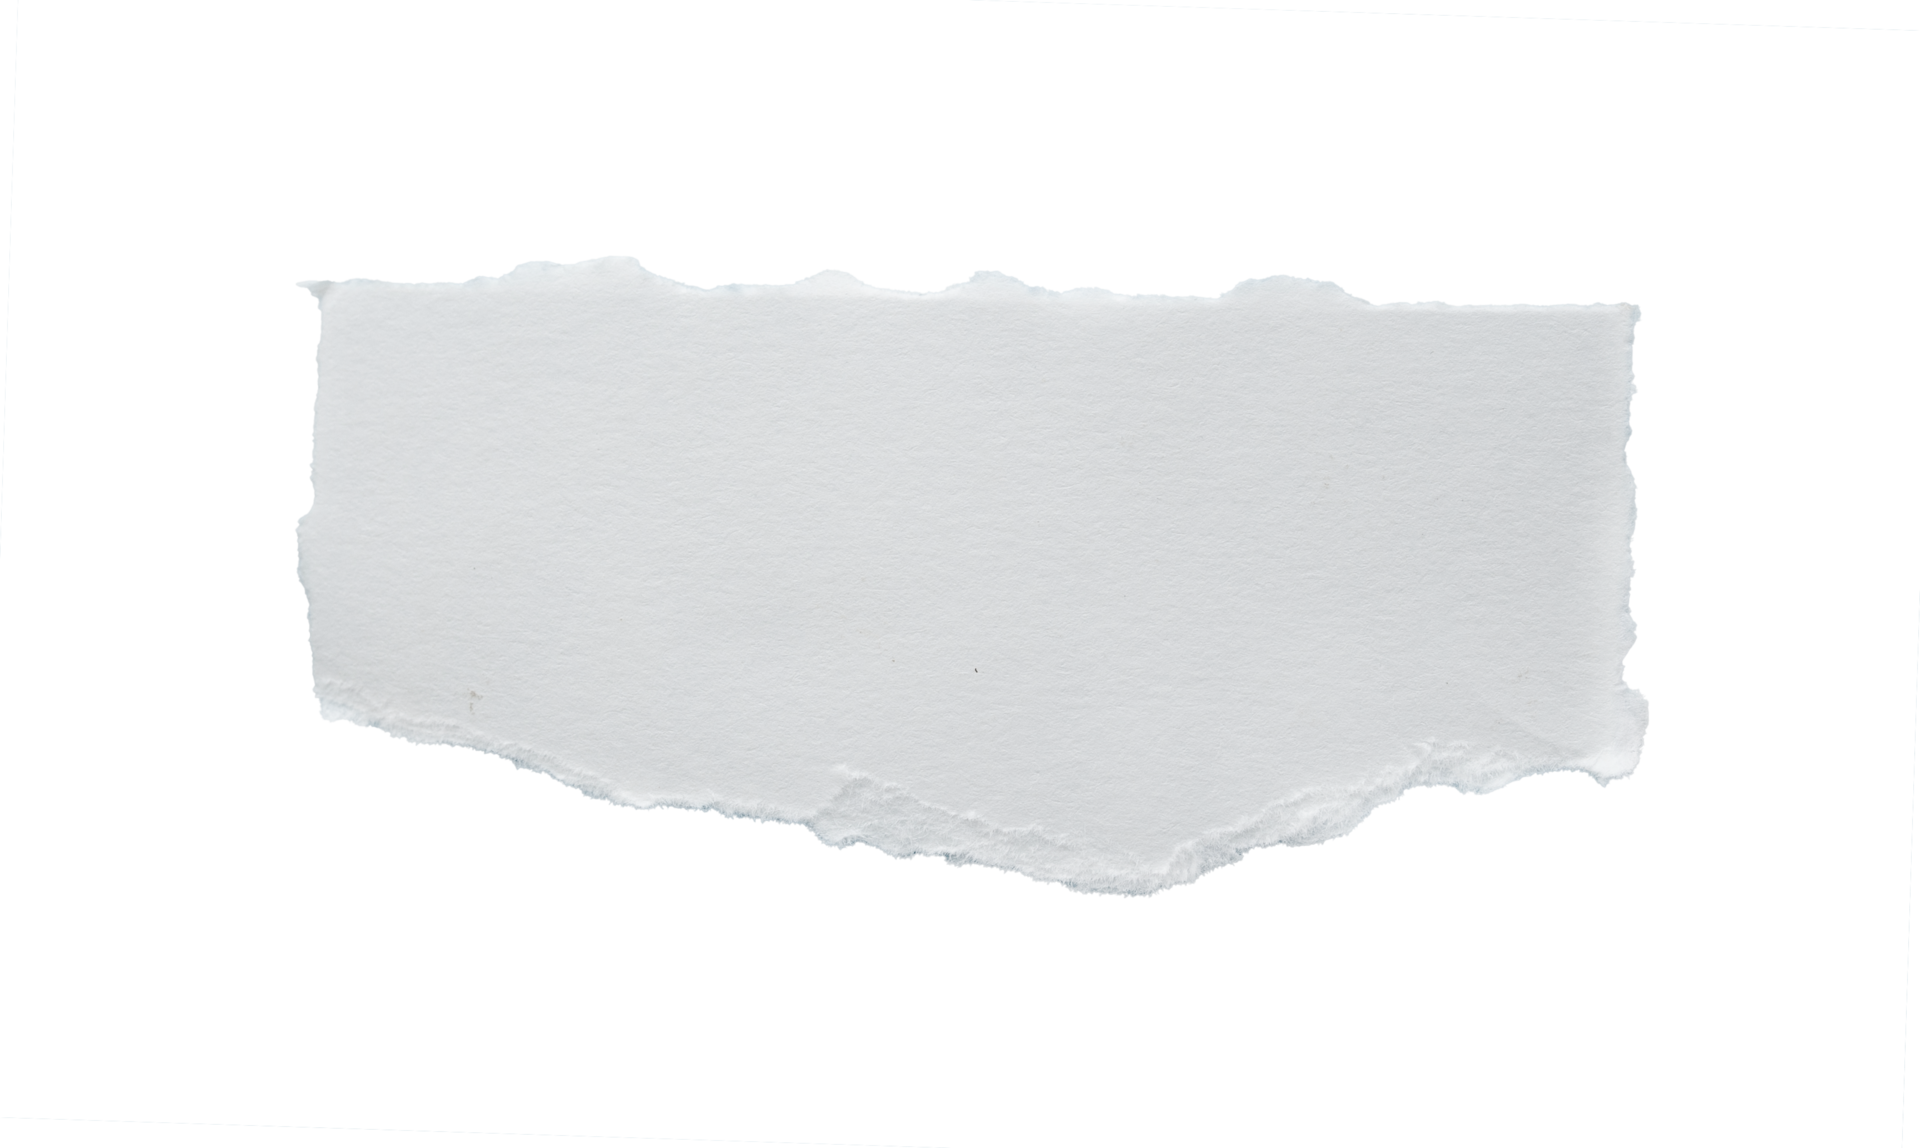 Paper Rip PNG Transparent Images - PNG All